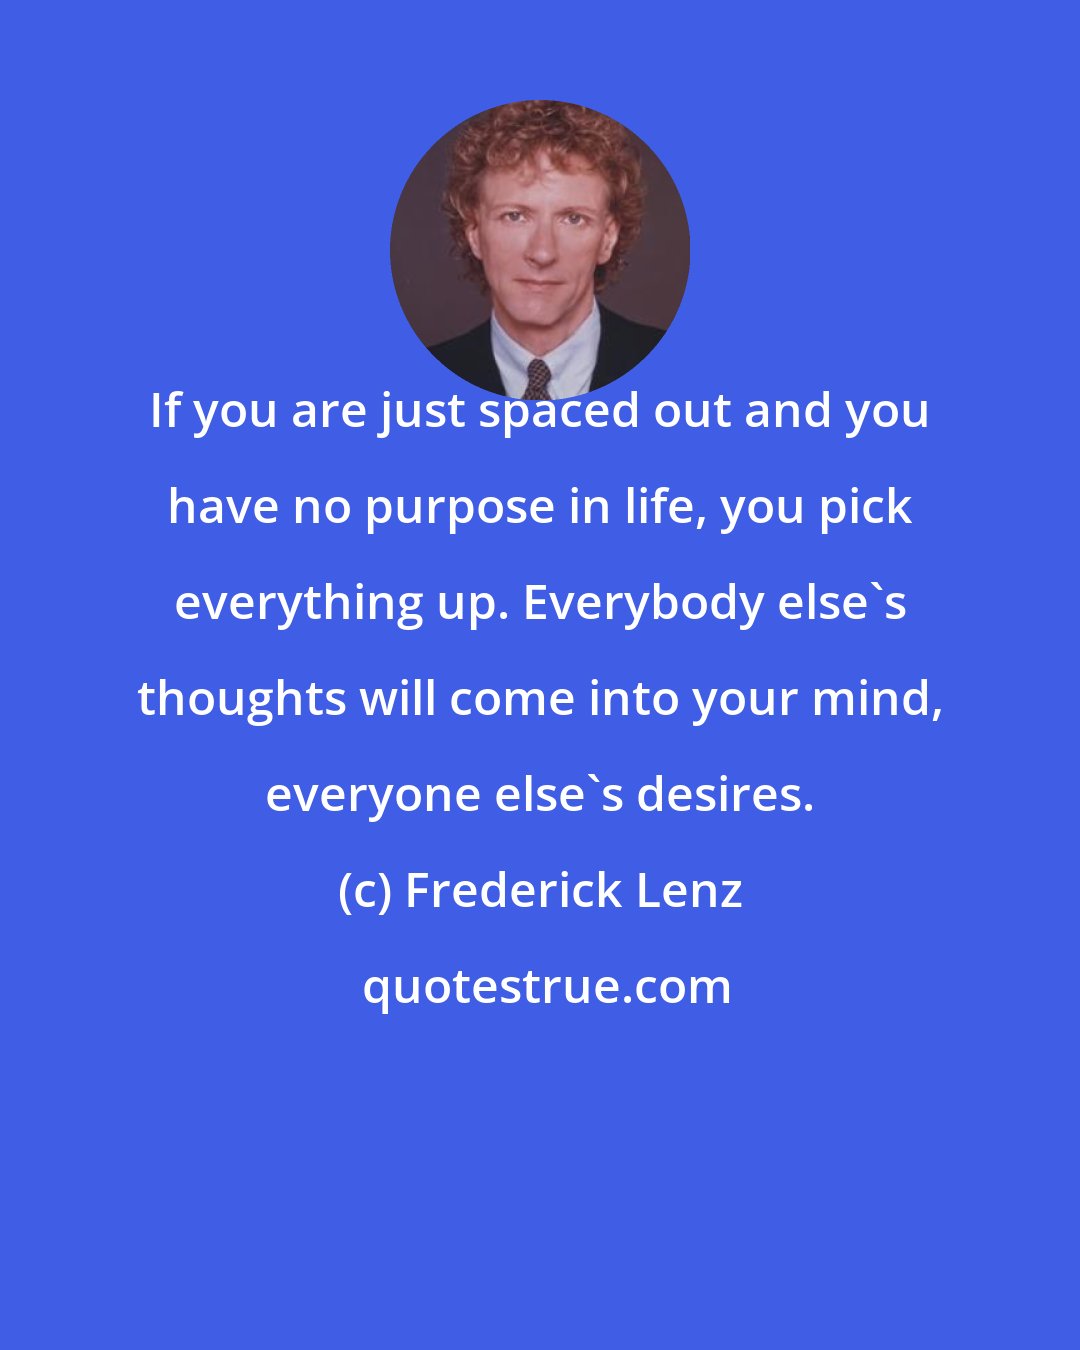 Frederick Lenz: If you are just spaced out and you have no purpose in life, you pick everything up. Everybody else's thoughts will come into your mind, everyone else's desires.